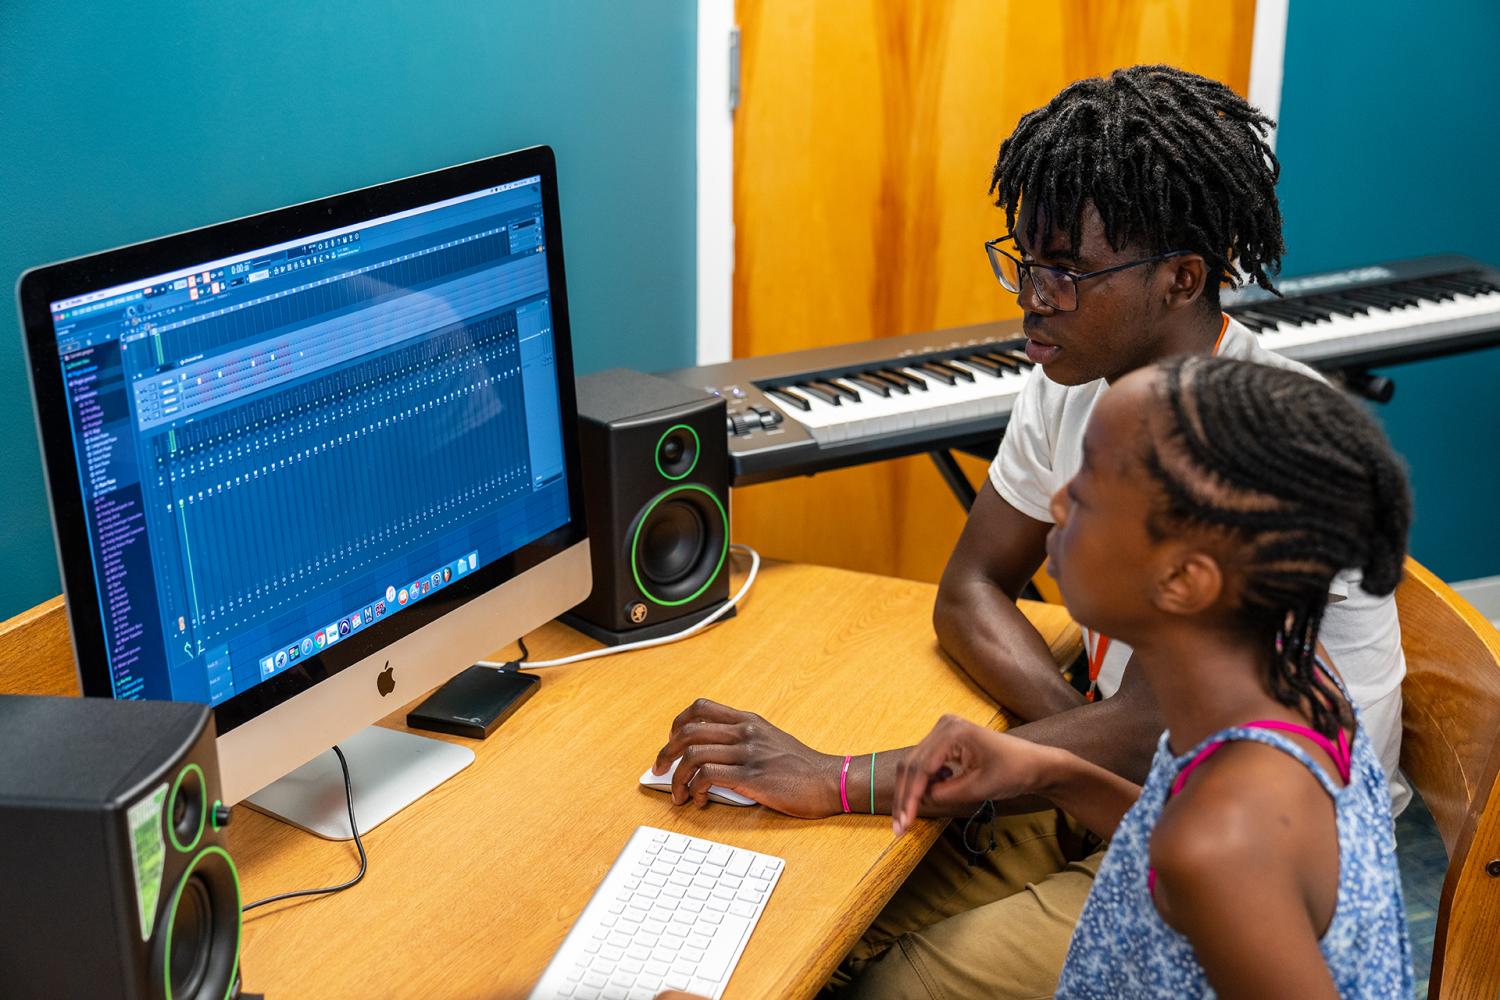 Teens using technology to produce music at the D.R.E.A.M. Lab
Production Camp at the Fairmount Heights Branch